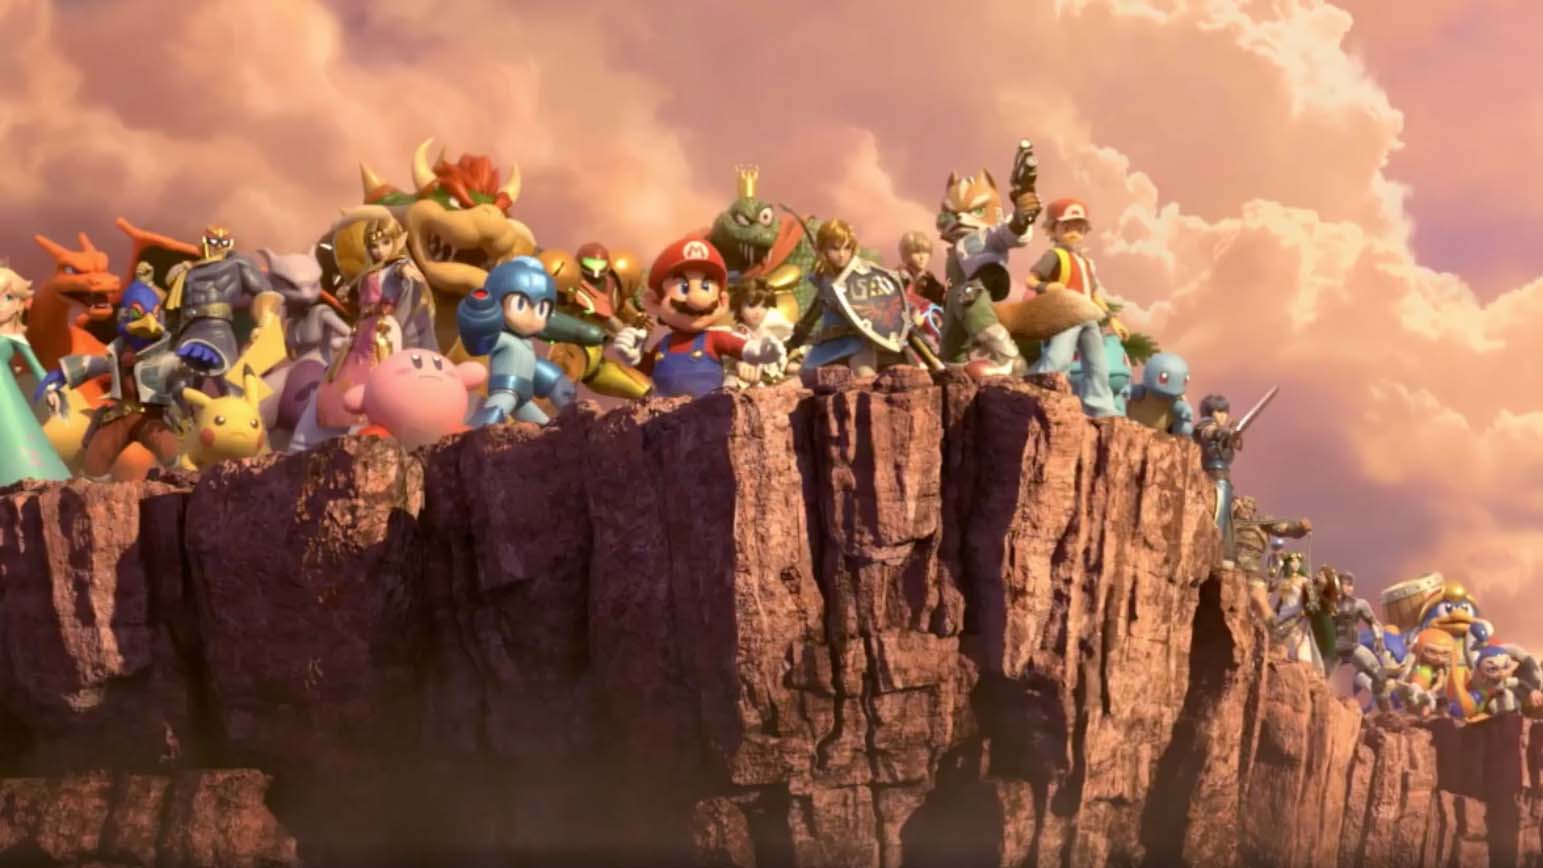 The full roster of fighting characters from Super Smash Bros, overlooking a cliff face